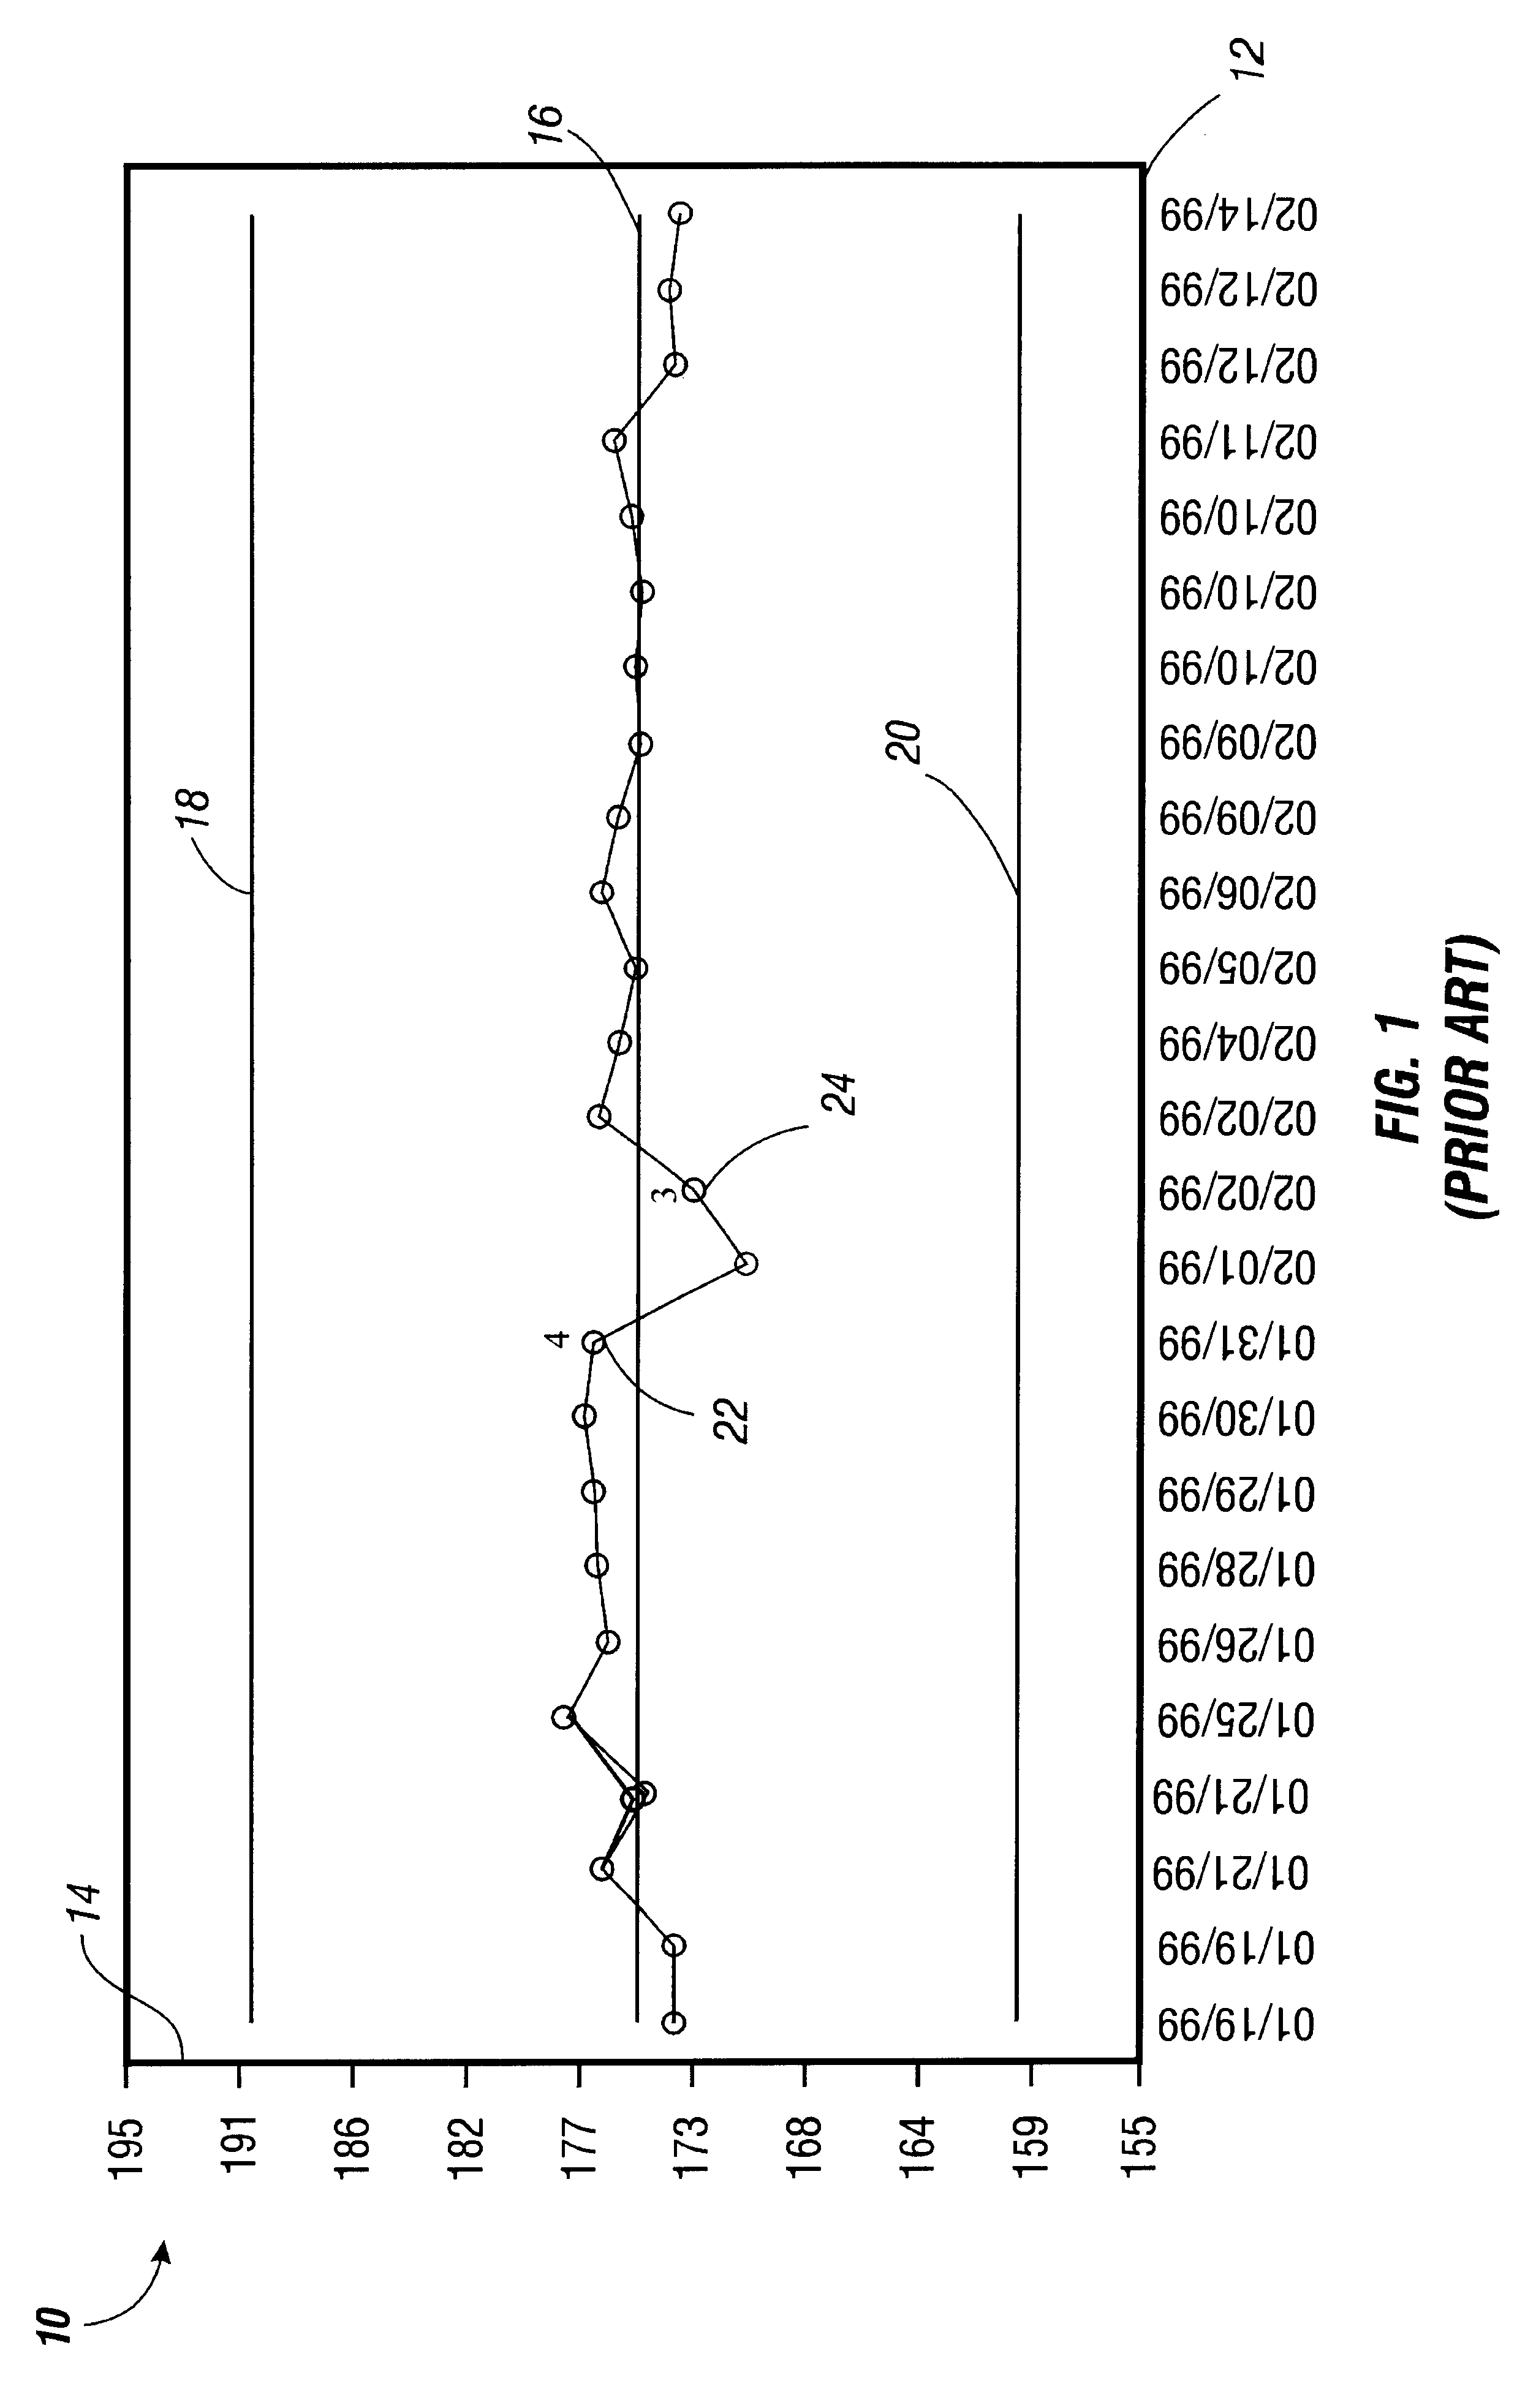 Statistical process control system with normalized control charting